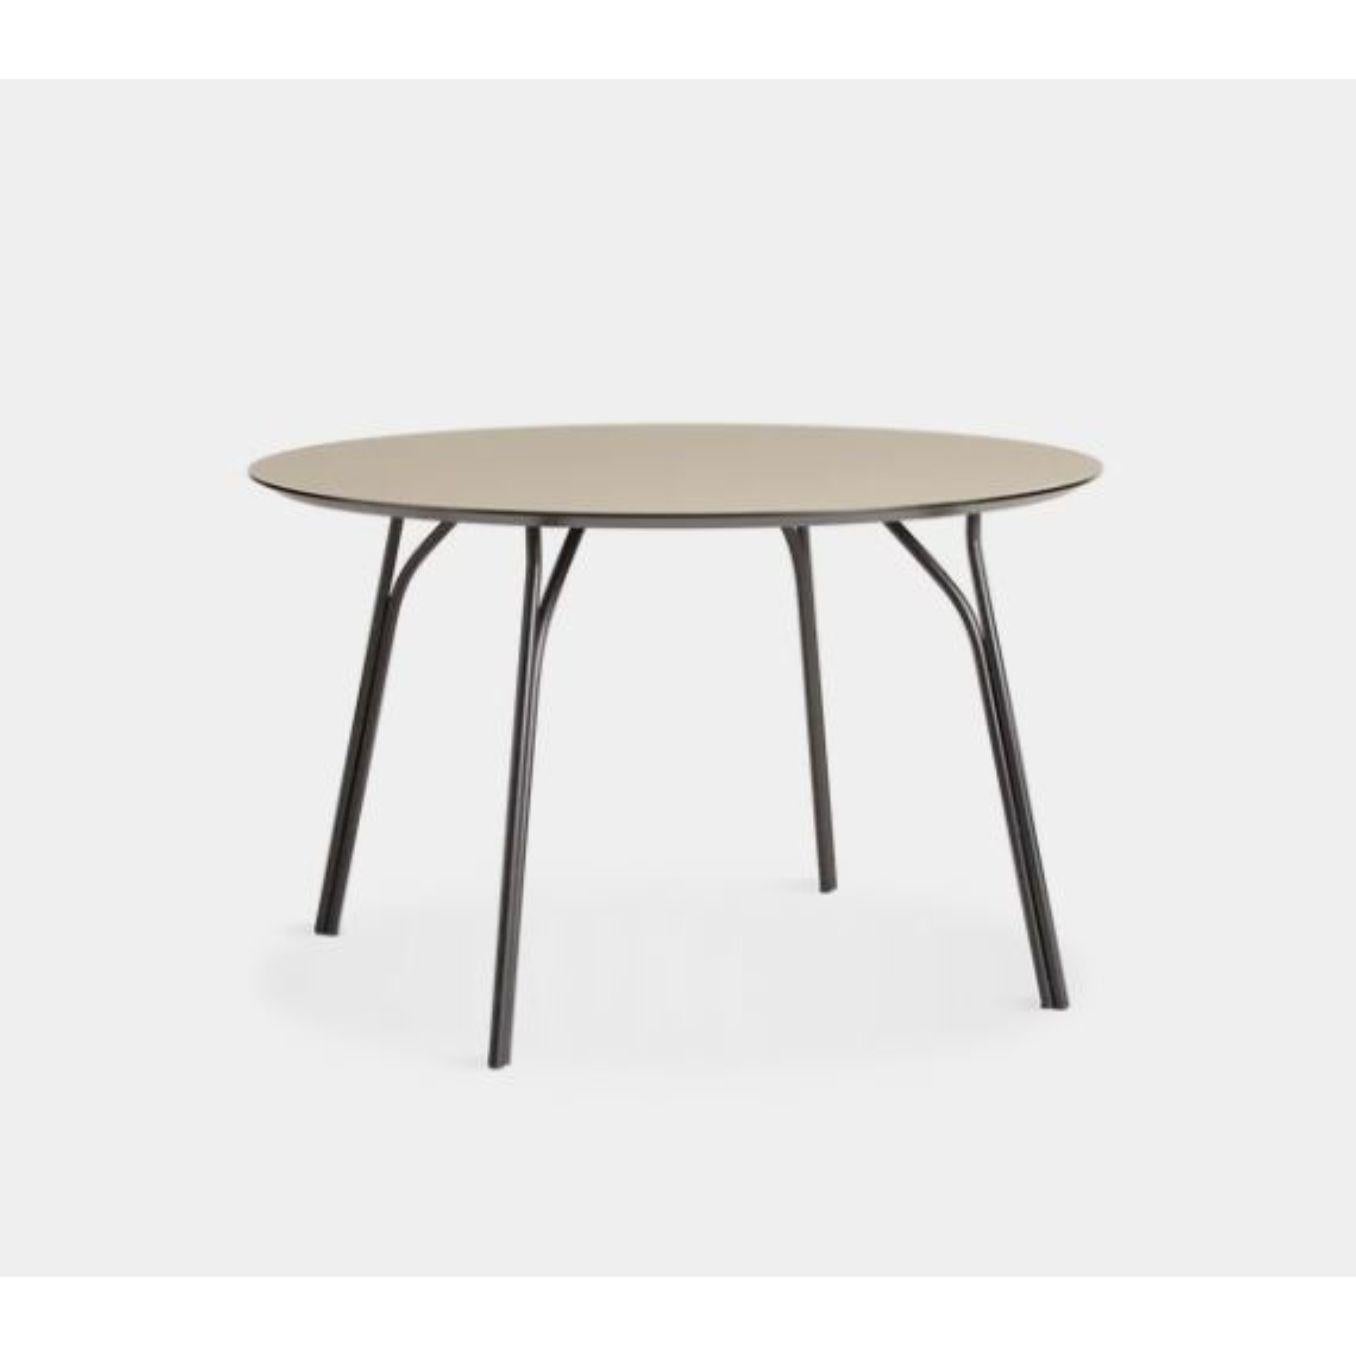 Tree medium dining table by Elisabeth Hertzfeld.
Materials: fenix Laminate, metal. 
Dimensions: D 120 x W 120 x H 74 cm.
Also available in different colours and dimensions.

The founders, Mia and Torben Koed, decided to put their 30 years of